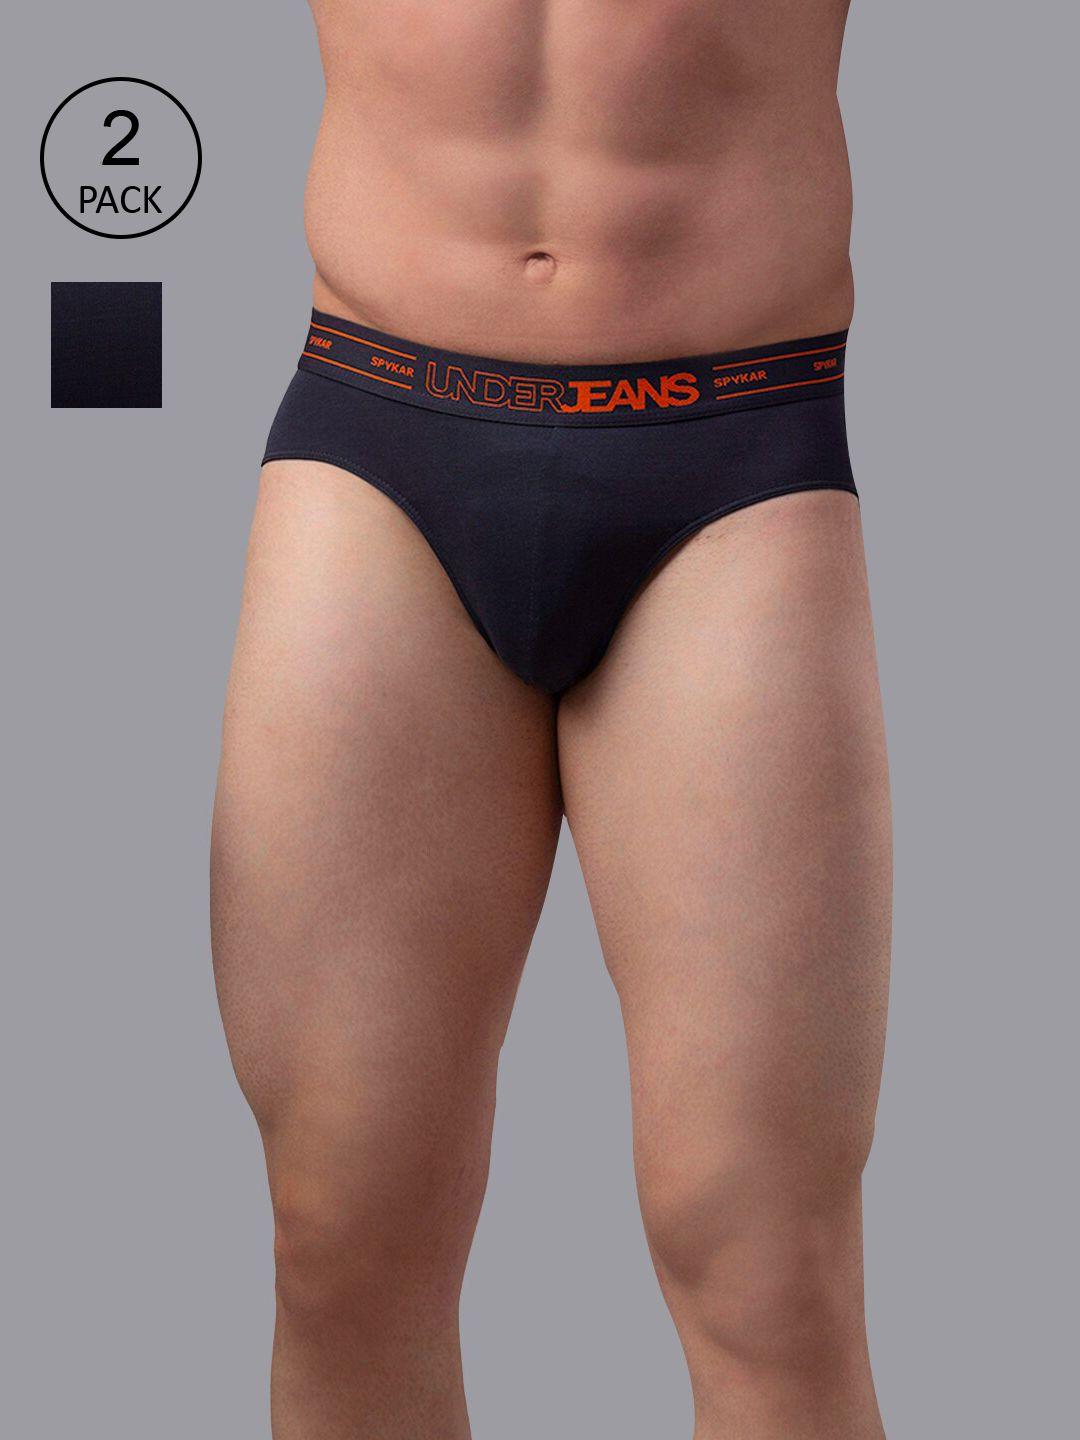 underjeans by spykar grey pack of 2 charcoal grey solid cotton blend briefs